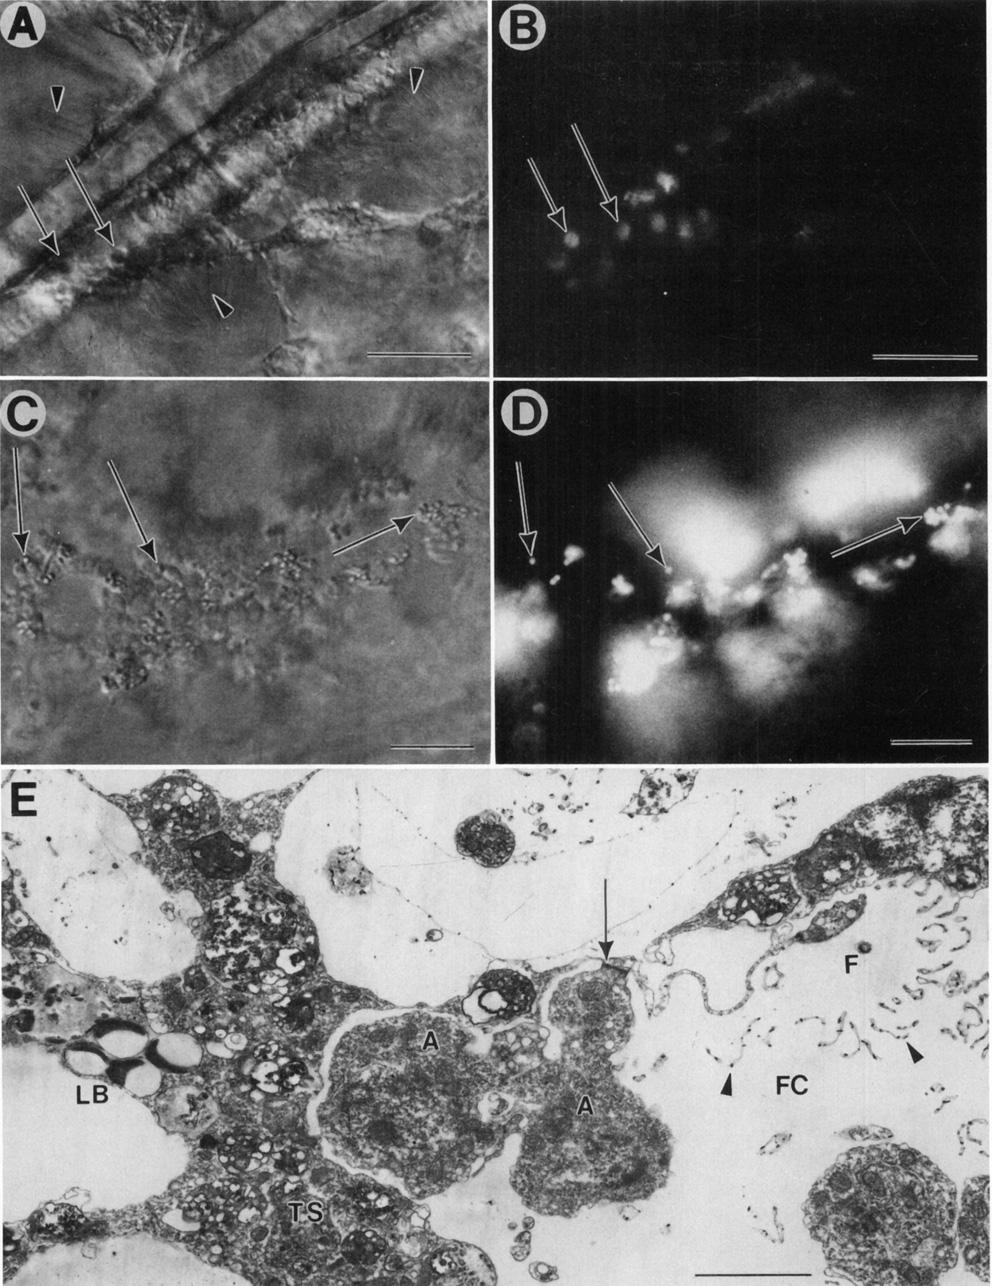 Feeding in a Hexactinellid Sponge 231 Fig. 3. Uptake of particles by sandwich cultures of R. dawsoni. A.B. The internalized golden-brown algae, I.